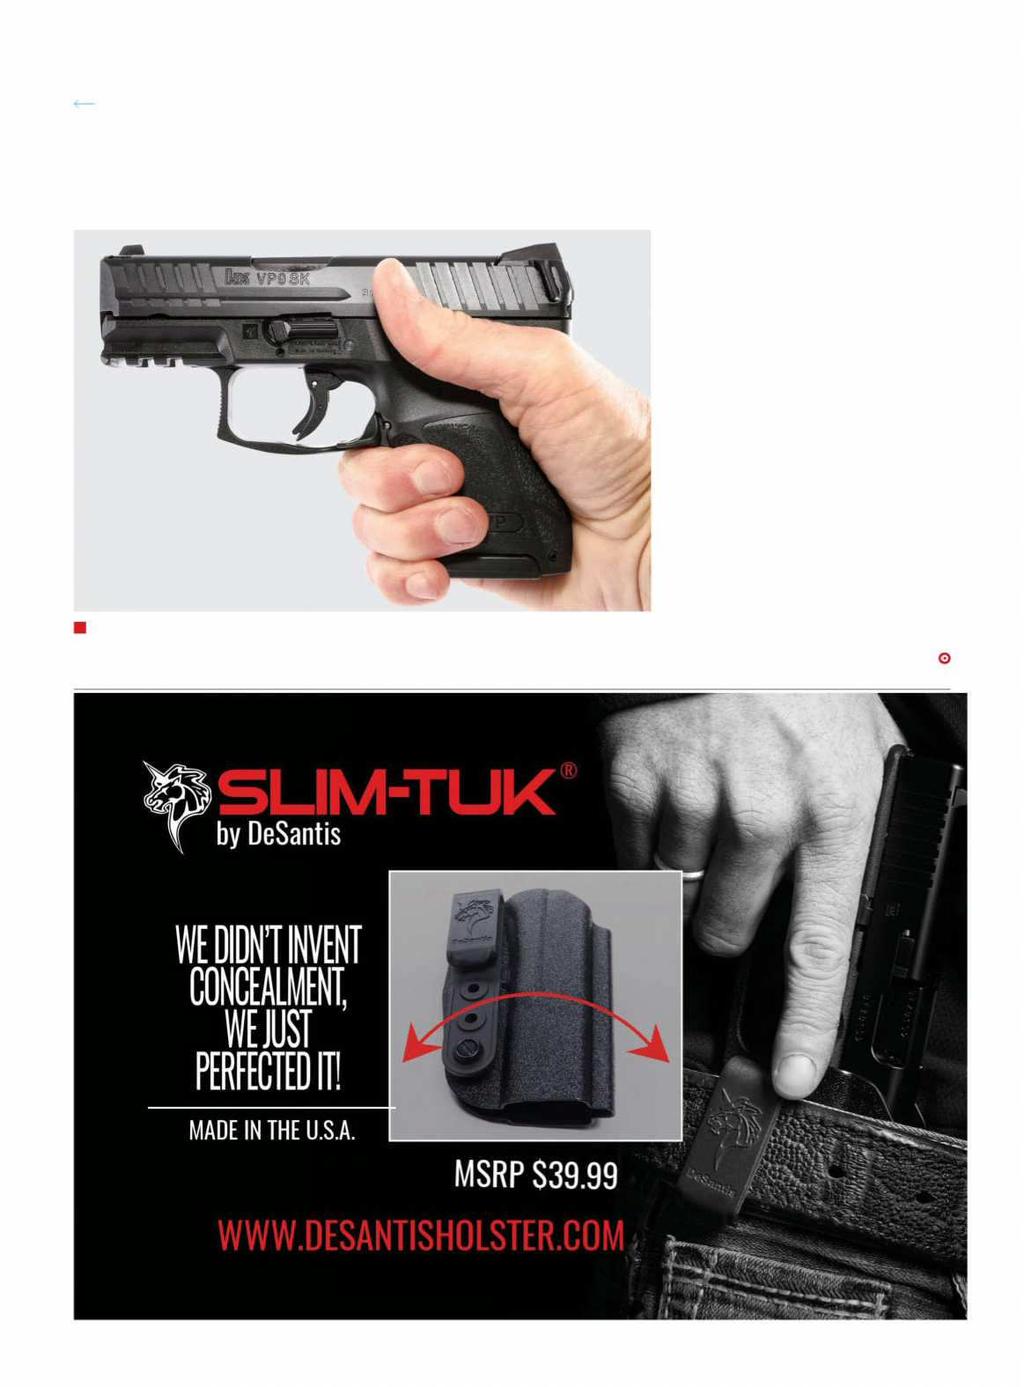 work. enough structural integrity to The VP9SK mags hold 10 rounds, butthepistolworkswithlarger-ca- SDFLW\+.PDJD]LQHV³VSHFLÀFDOO\ those designed for the VP9 and P30, both 13- and 15-rounders.